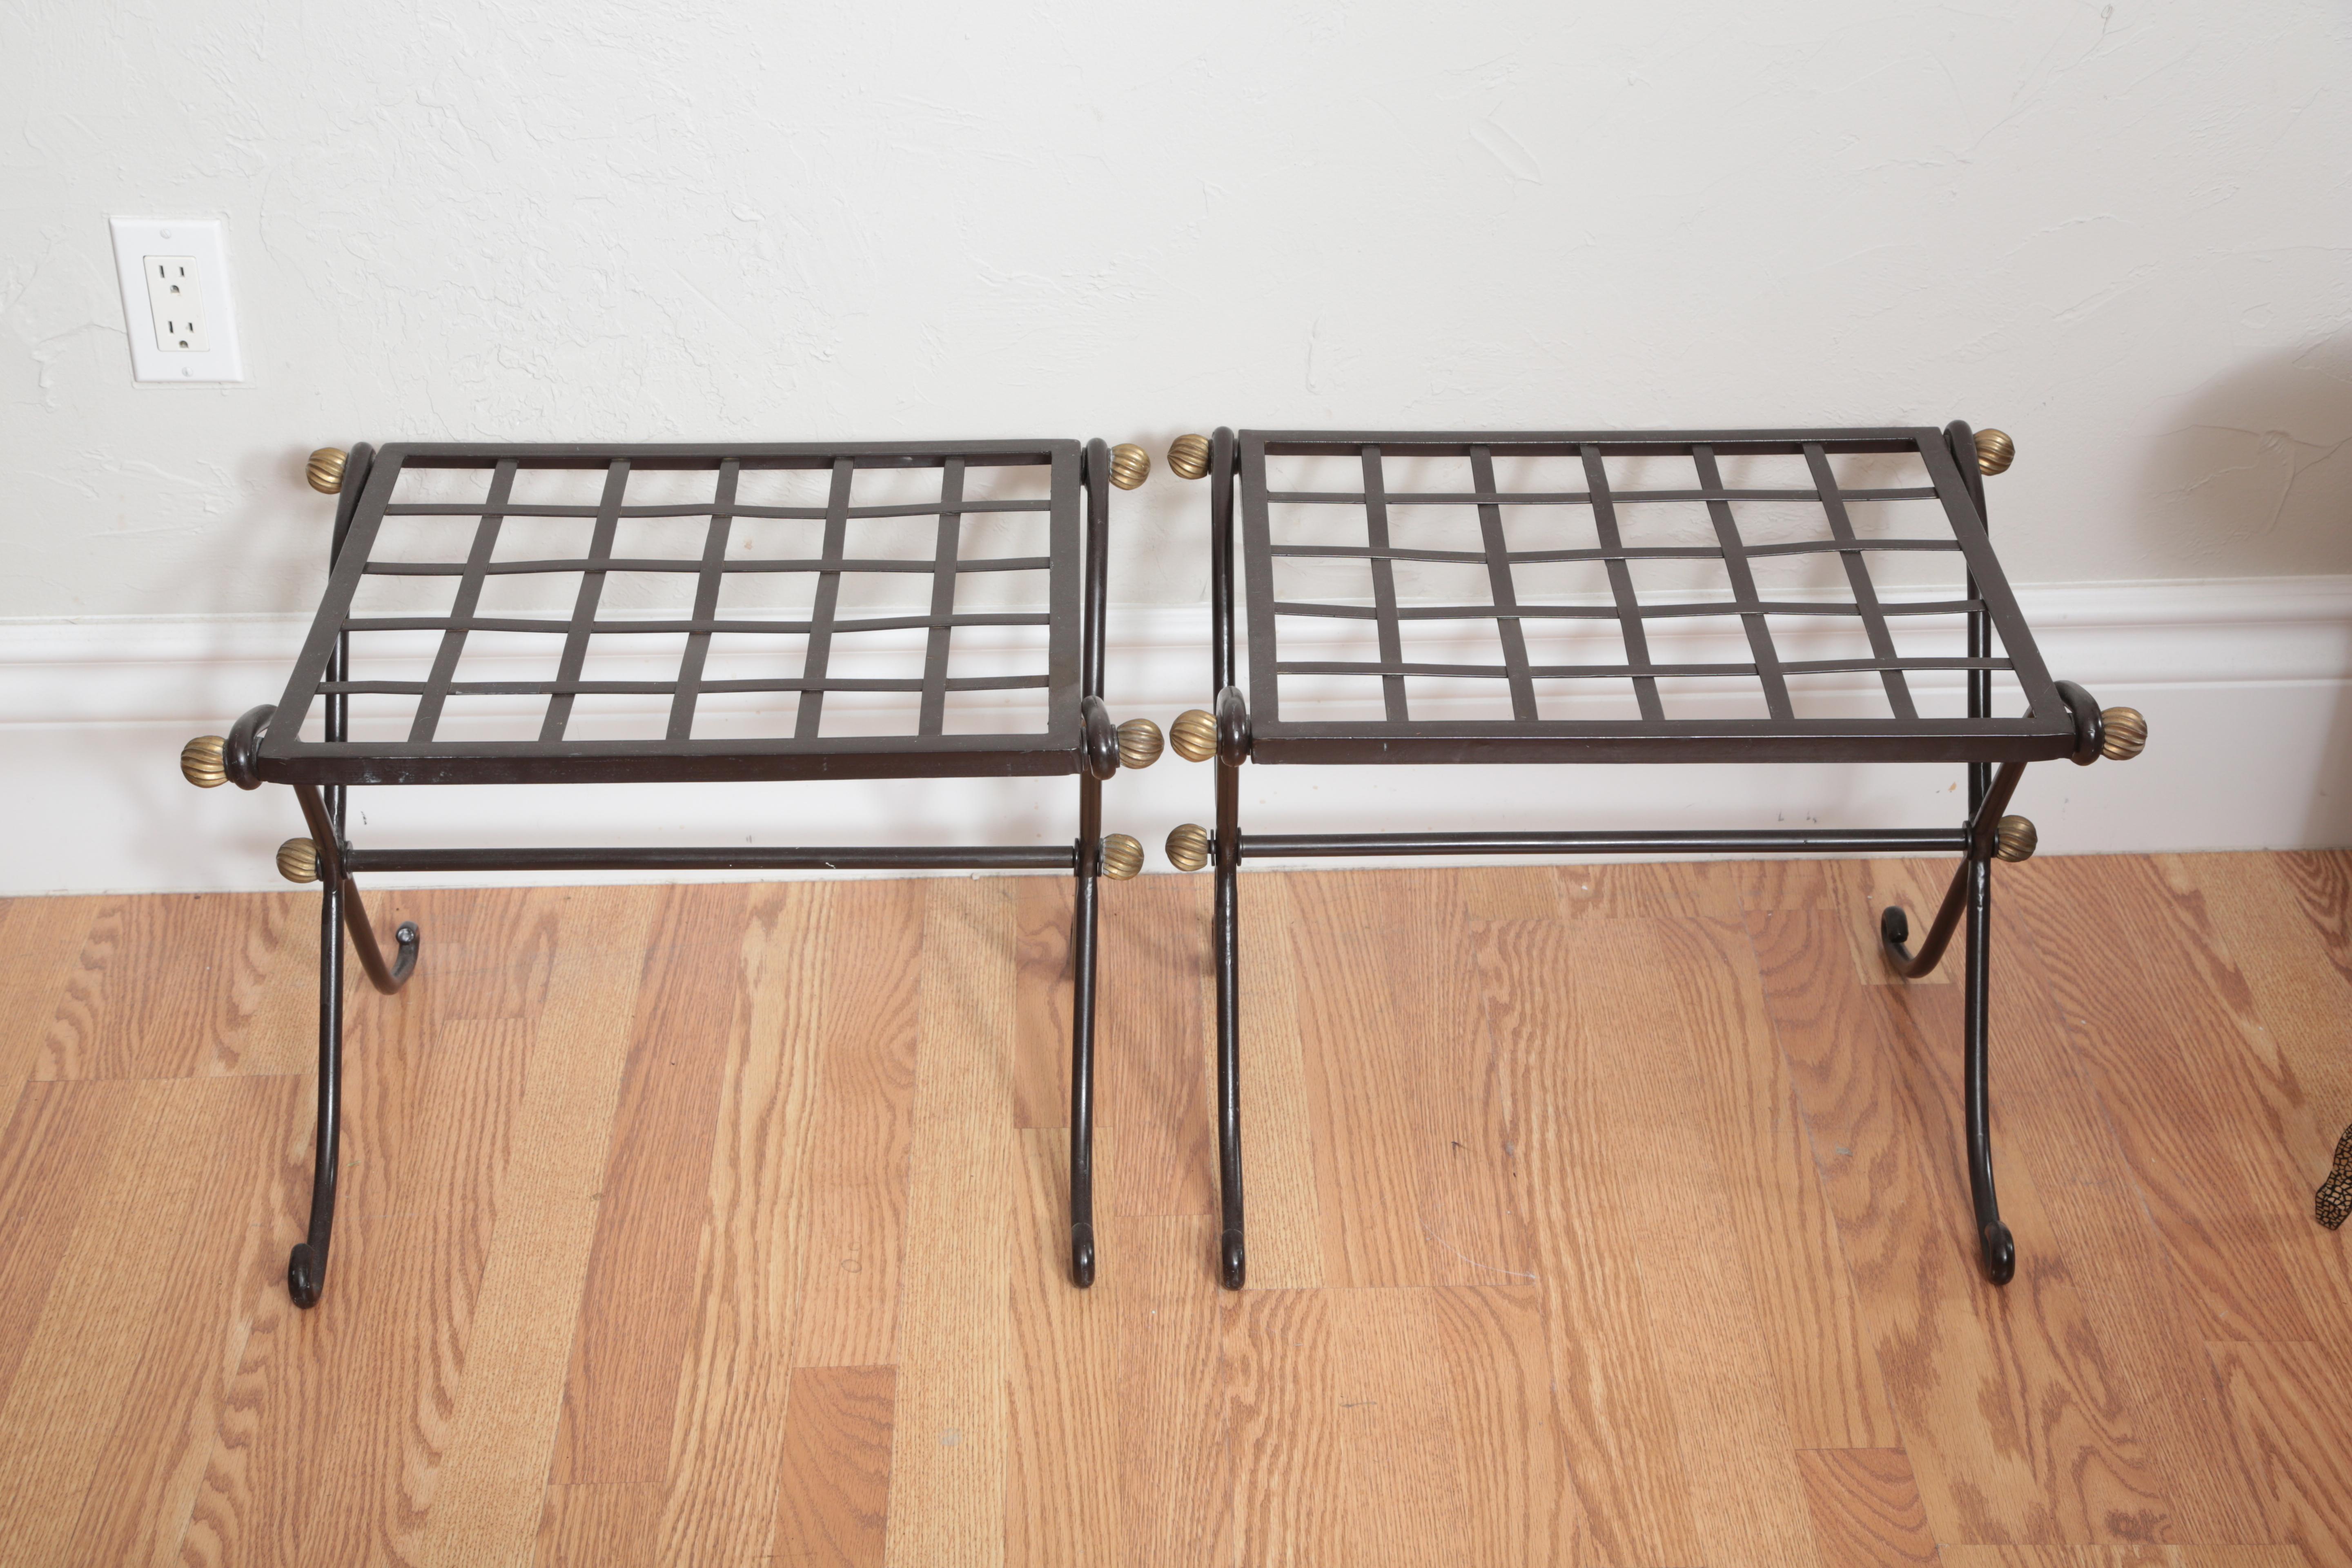 Pair of iron lattice top benches with brass trim. They would also make great luggage racks.